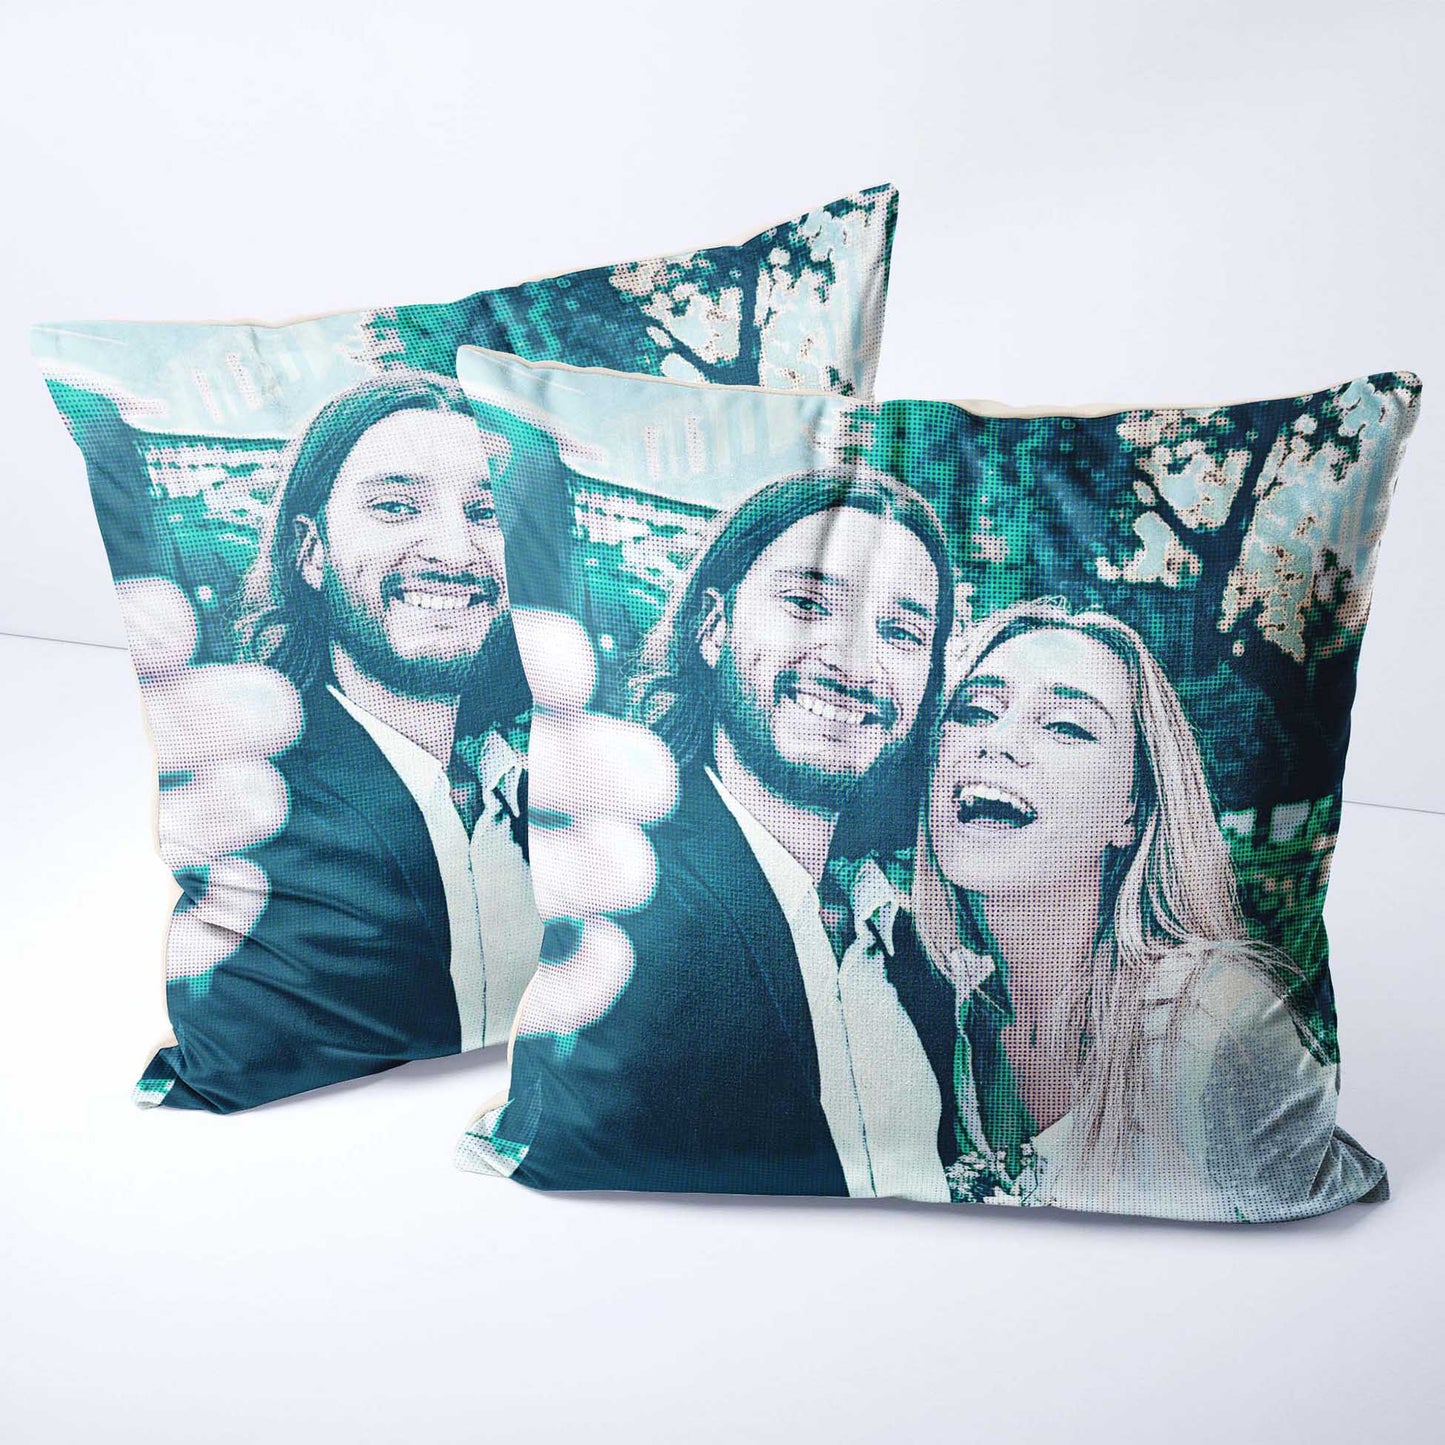 The Personalised Teal Grunge Cushion is a true statement piece for your home decor. Printed from your photo, it features a distinctive halftone effect and grunge texture that exudes old school charm, handmade